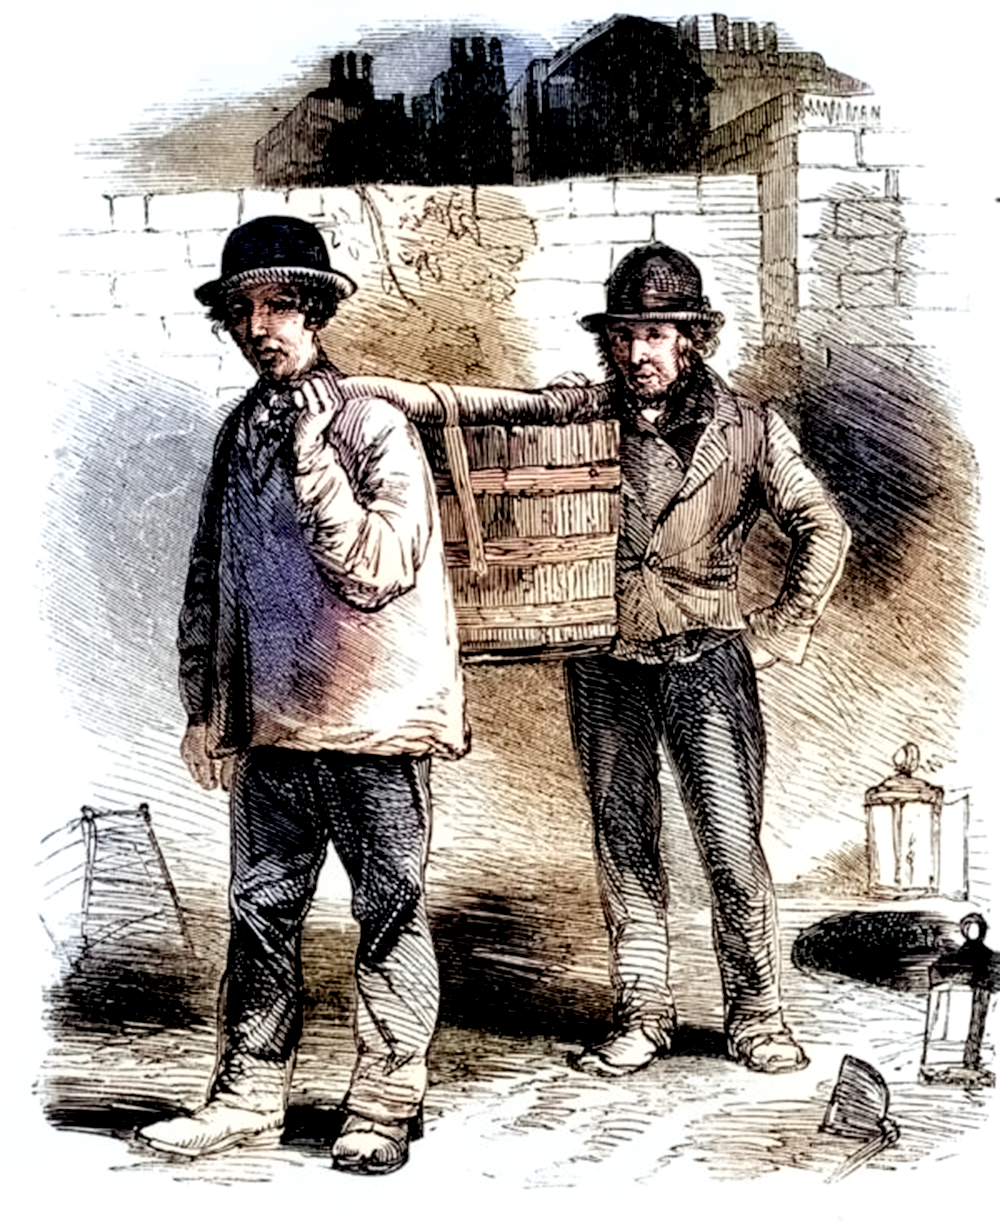 An illustration that shows two men standing in front of a brick wall. One man is wearing a bowler hat and a jacket, while the other man is wearing a suit and a bowler hat. One of the men is carrying a large crate on his back.